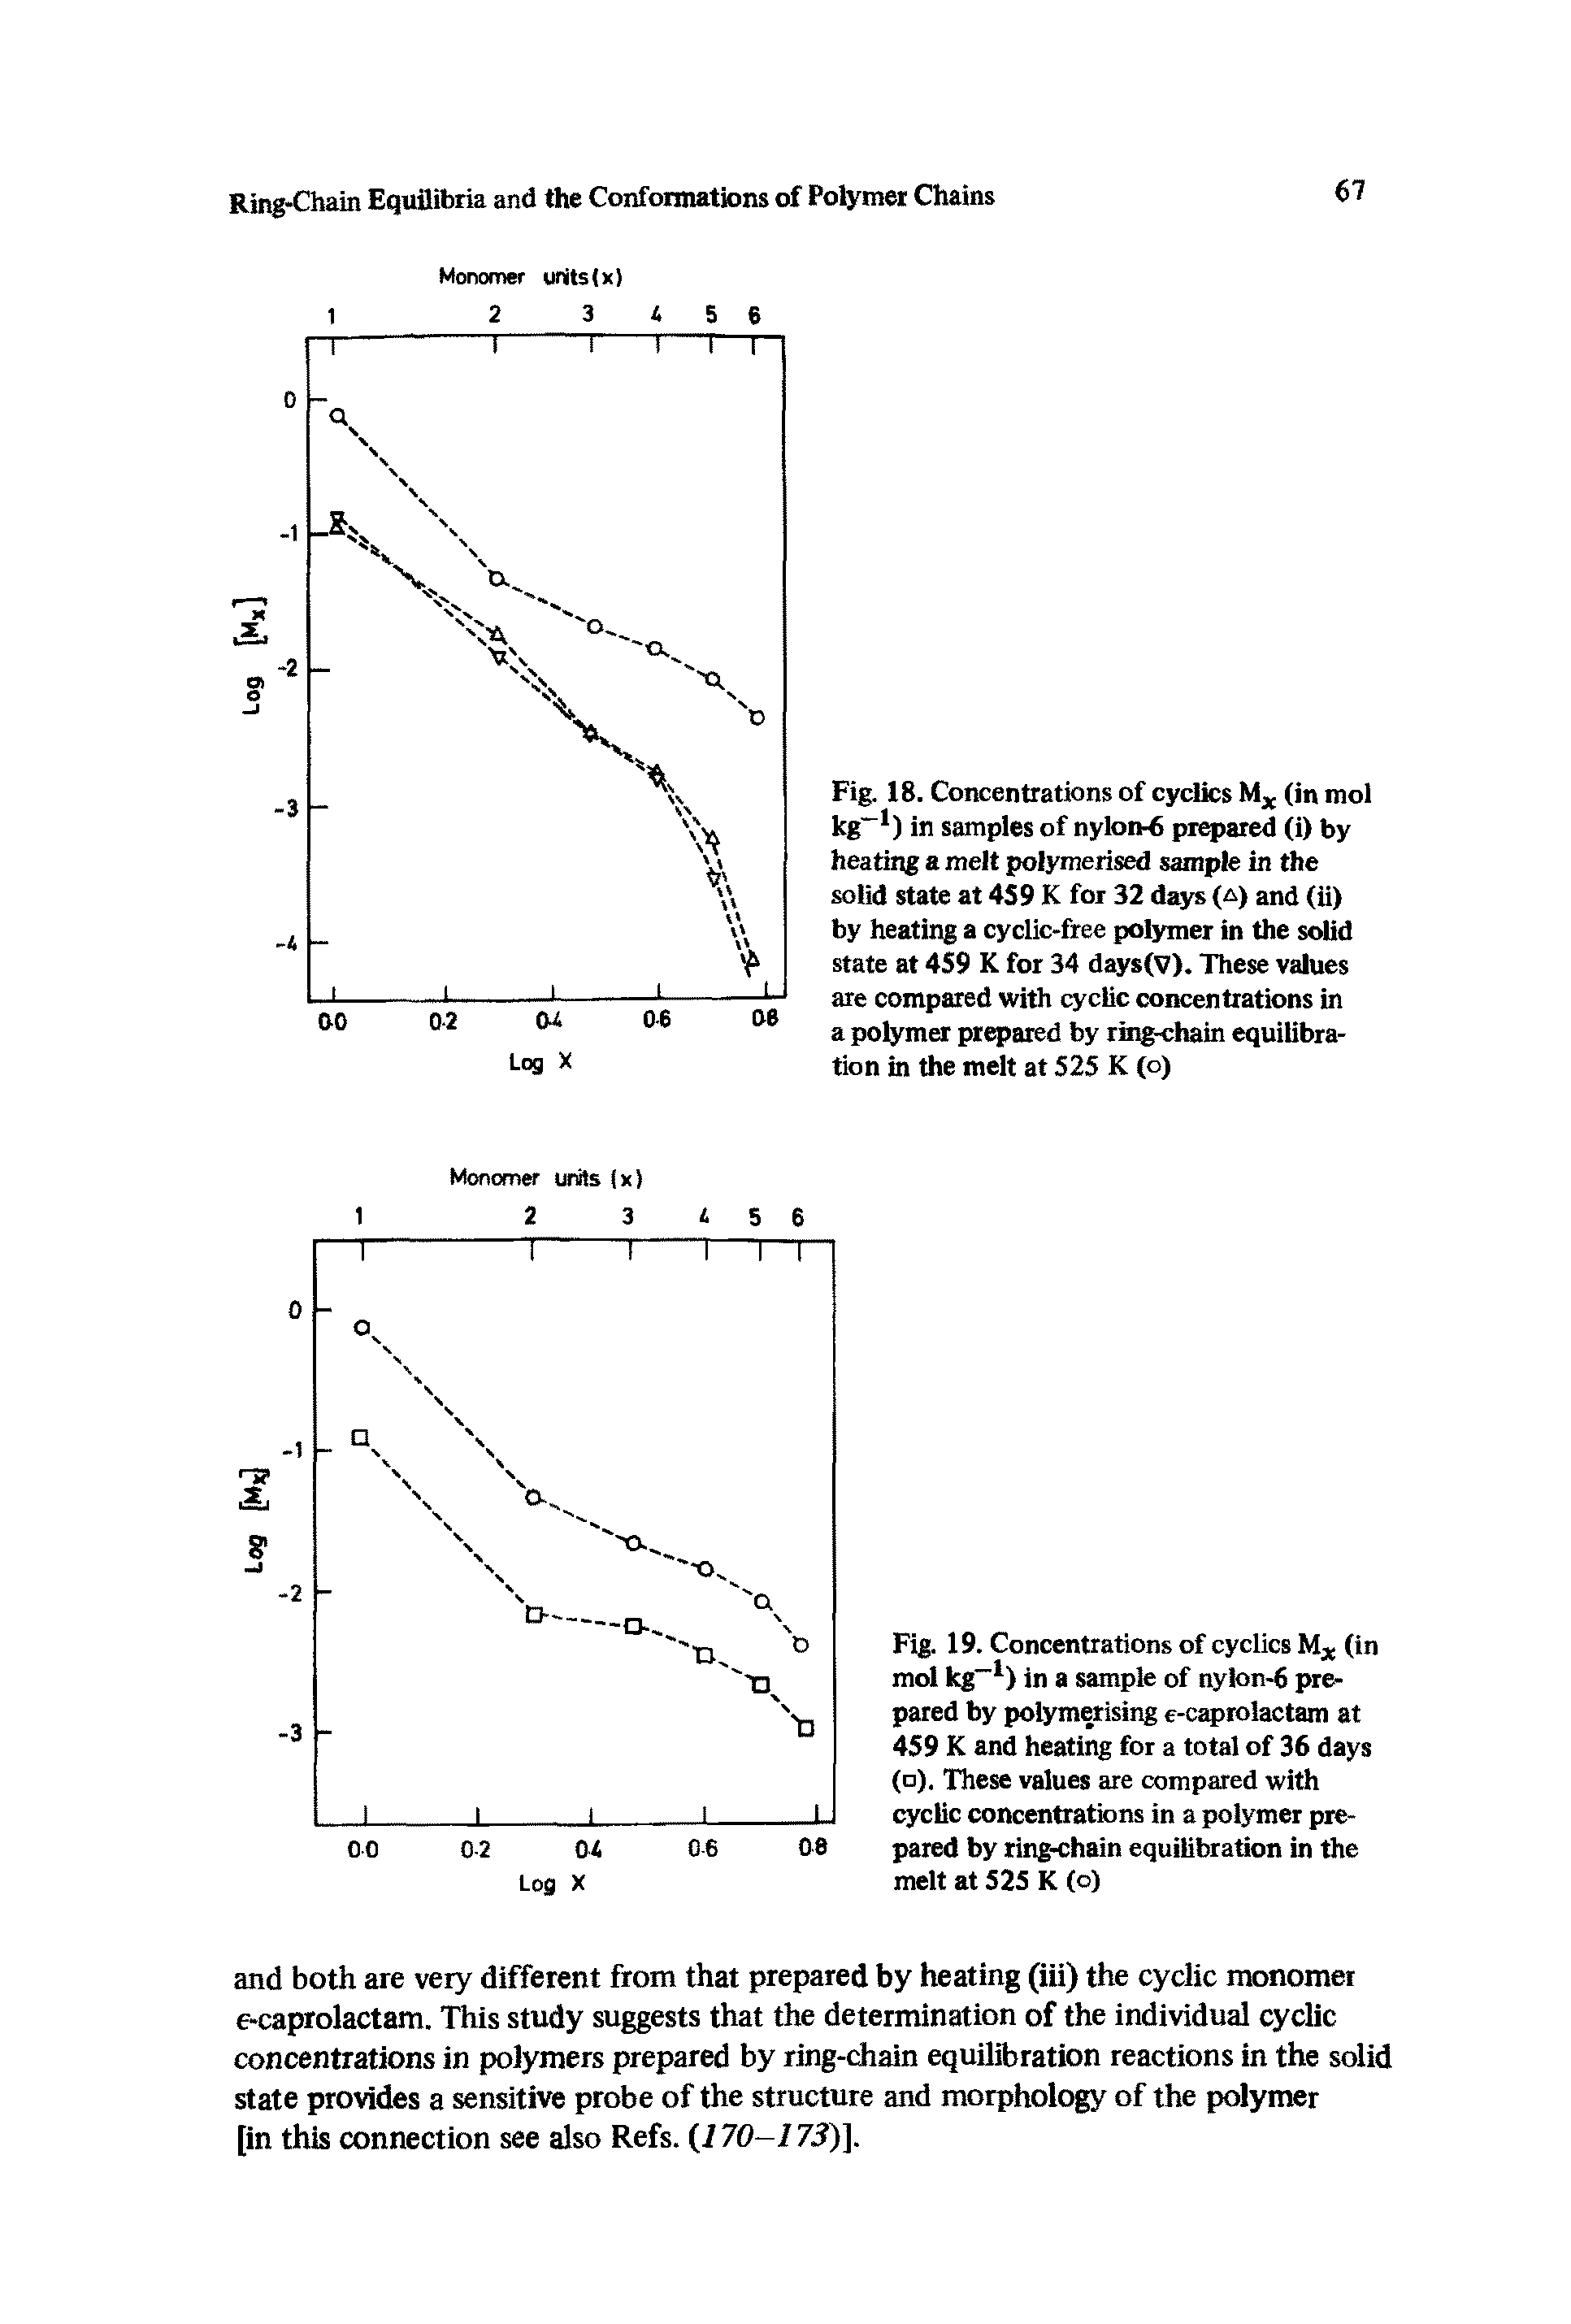 Fig. 19. Concentrations of cyclics M (in mol kg ) in a sample of nylon-6 prepared by polymerising e-caprolactam at 459 K and heating for a total of 36 days ( ). These values are compared with cyclic concentrations in a polymer prepared by ring-chain equilibration in the melt at 525 K (o)...